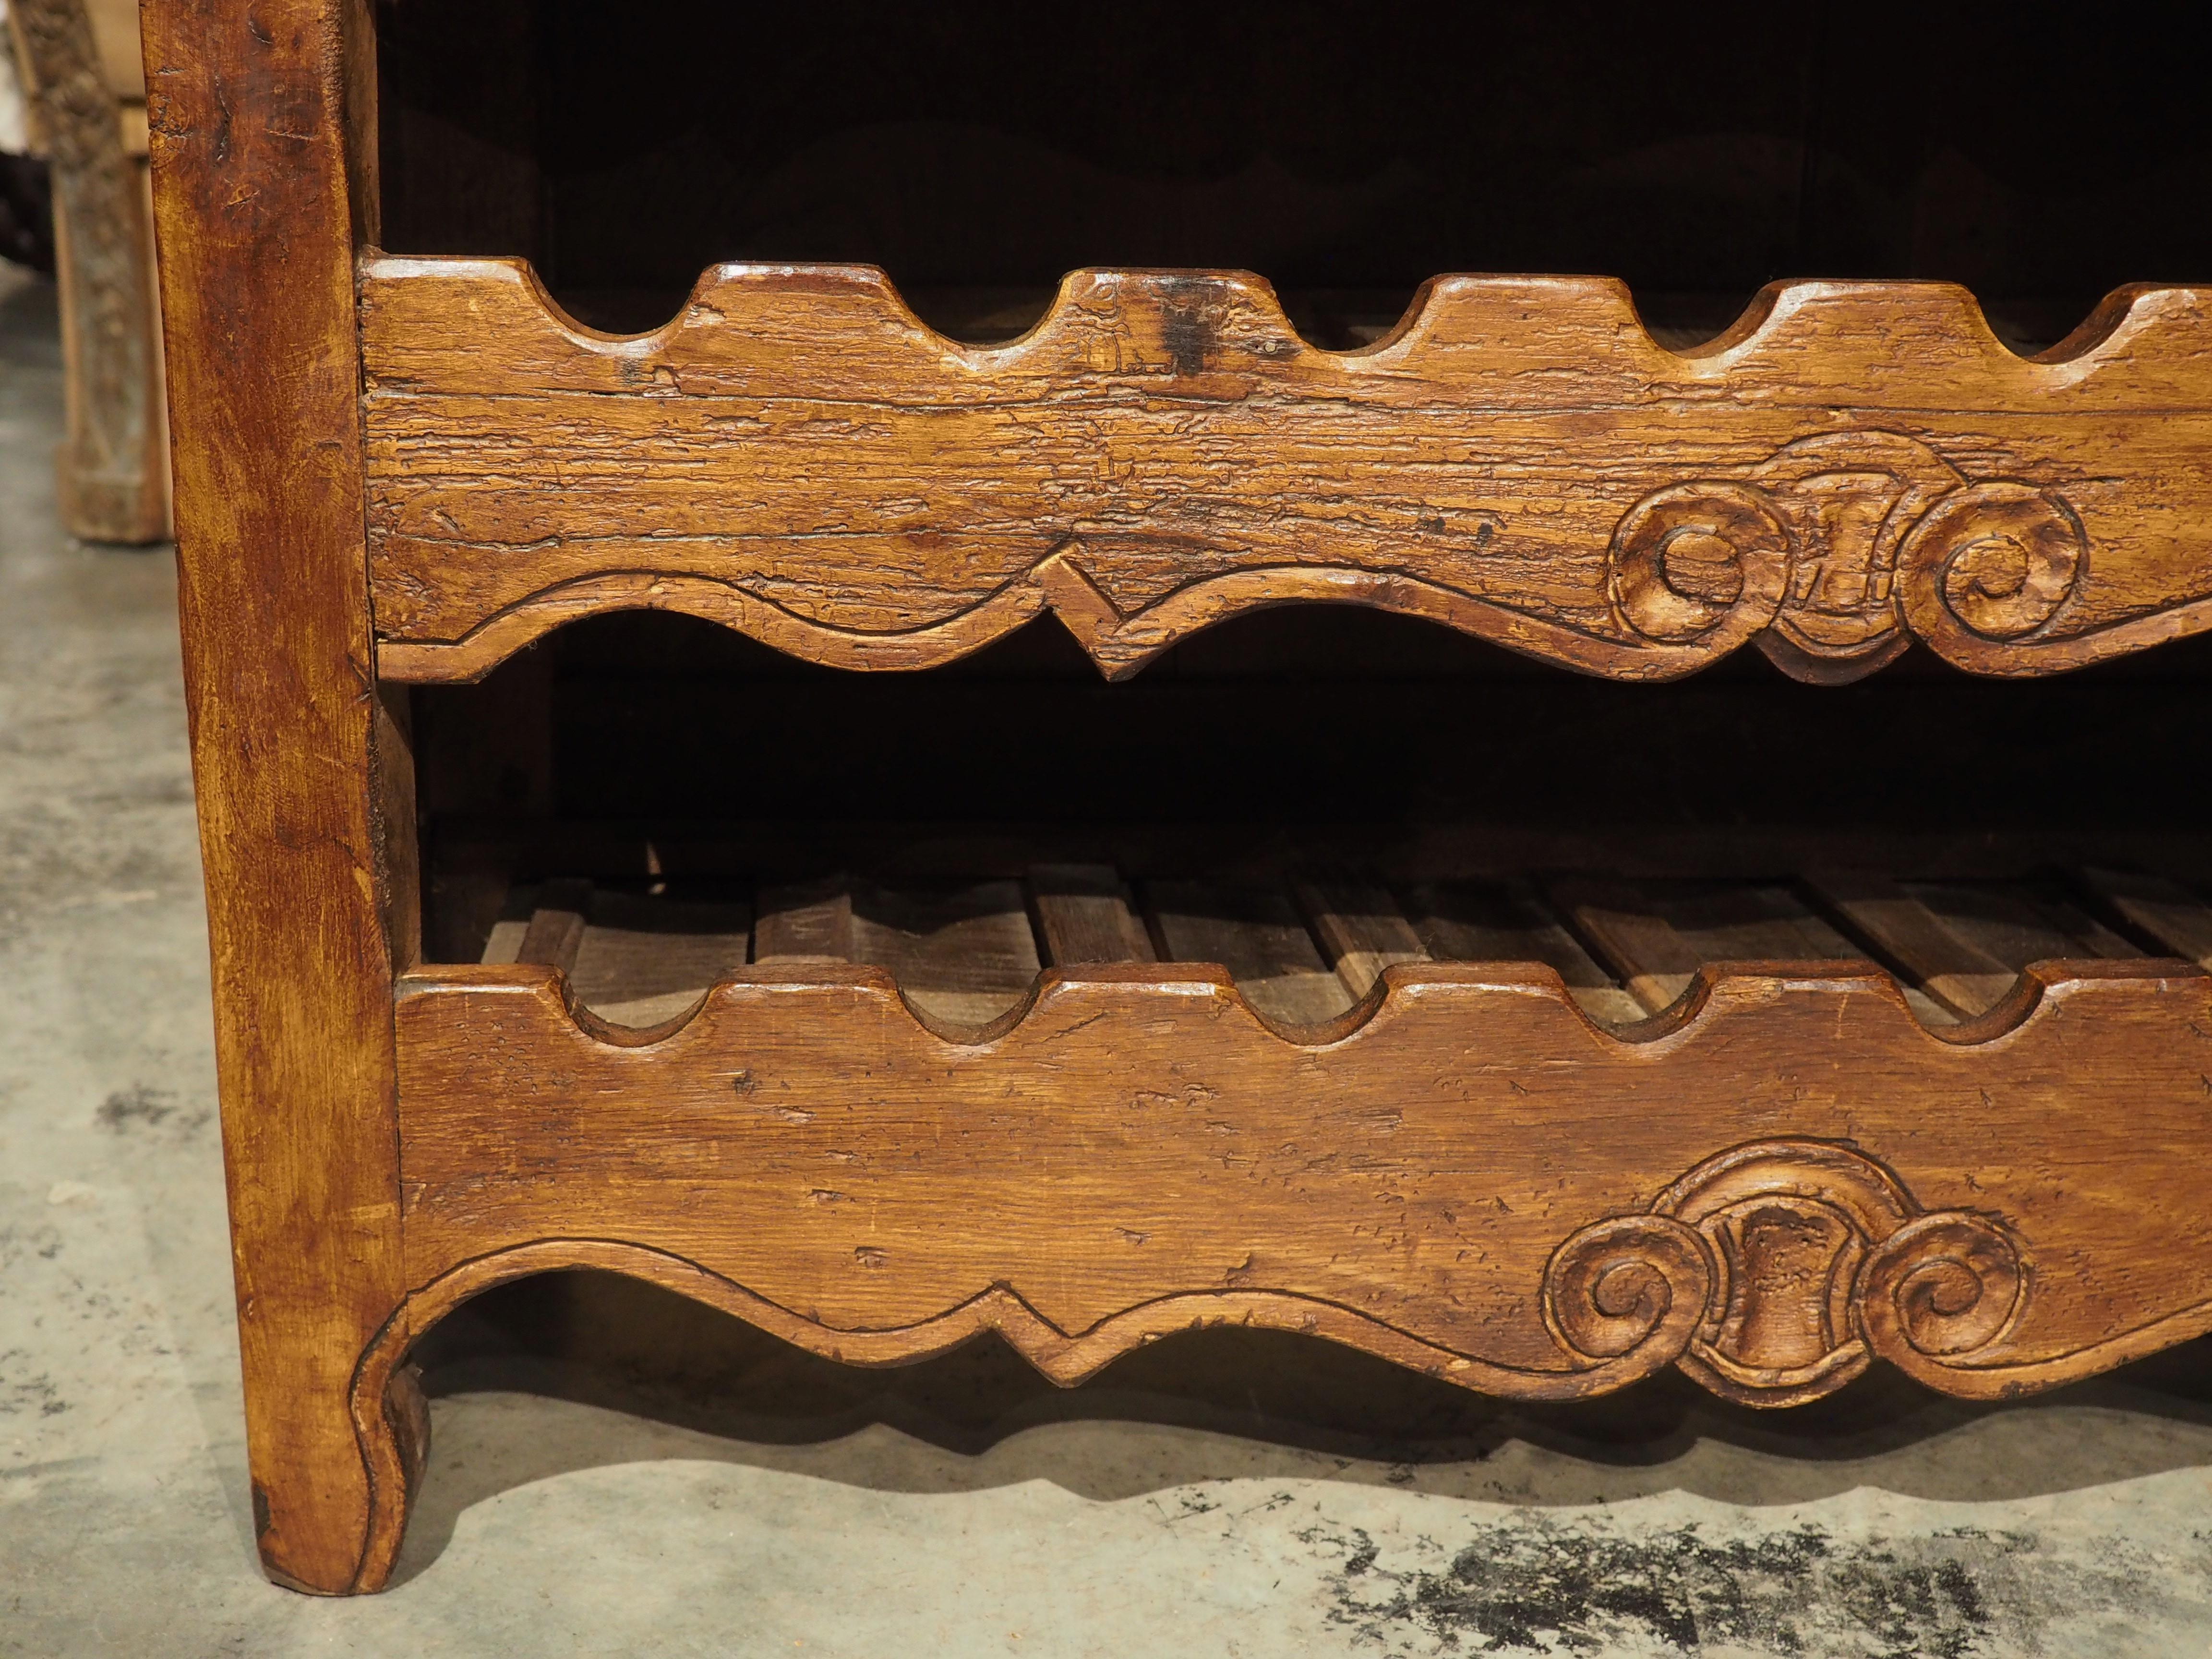 Hand-crafted by a French woodworker who specializes in repurposing antique furniture (in this case 19th century wood), this 24-bottle wine carrier with drawers has Bordeaux painted on the face of the top shelf. This extremely talented woodworker